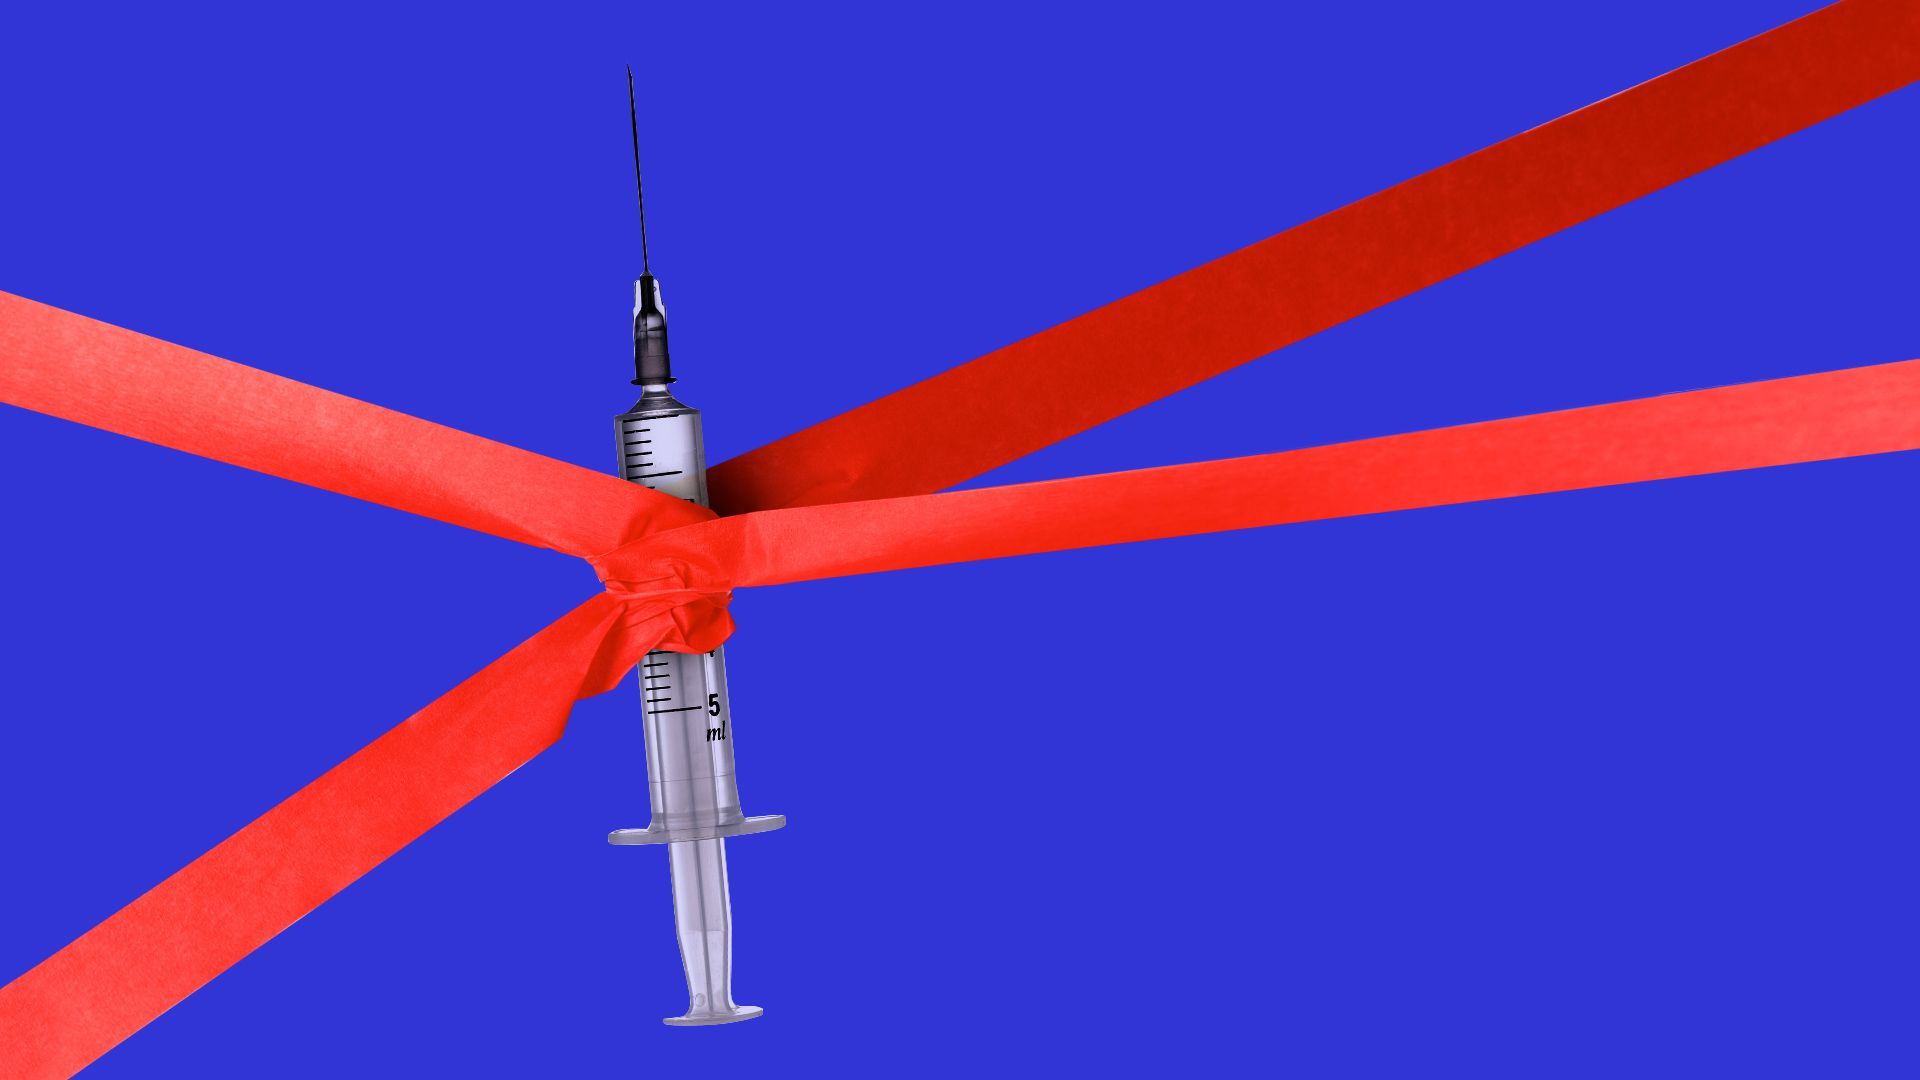 Illustration of a syringe suspended and held up by red tape.  